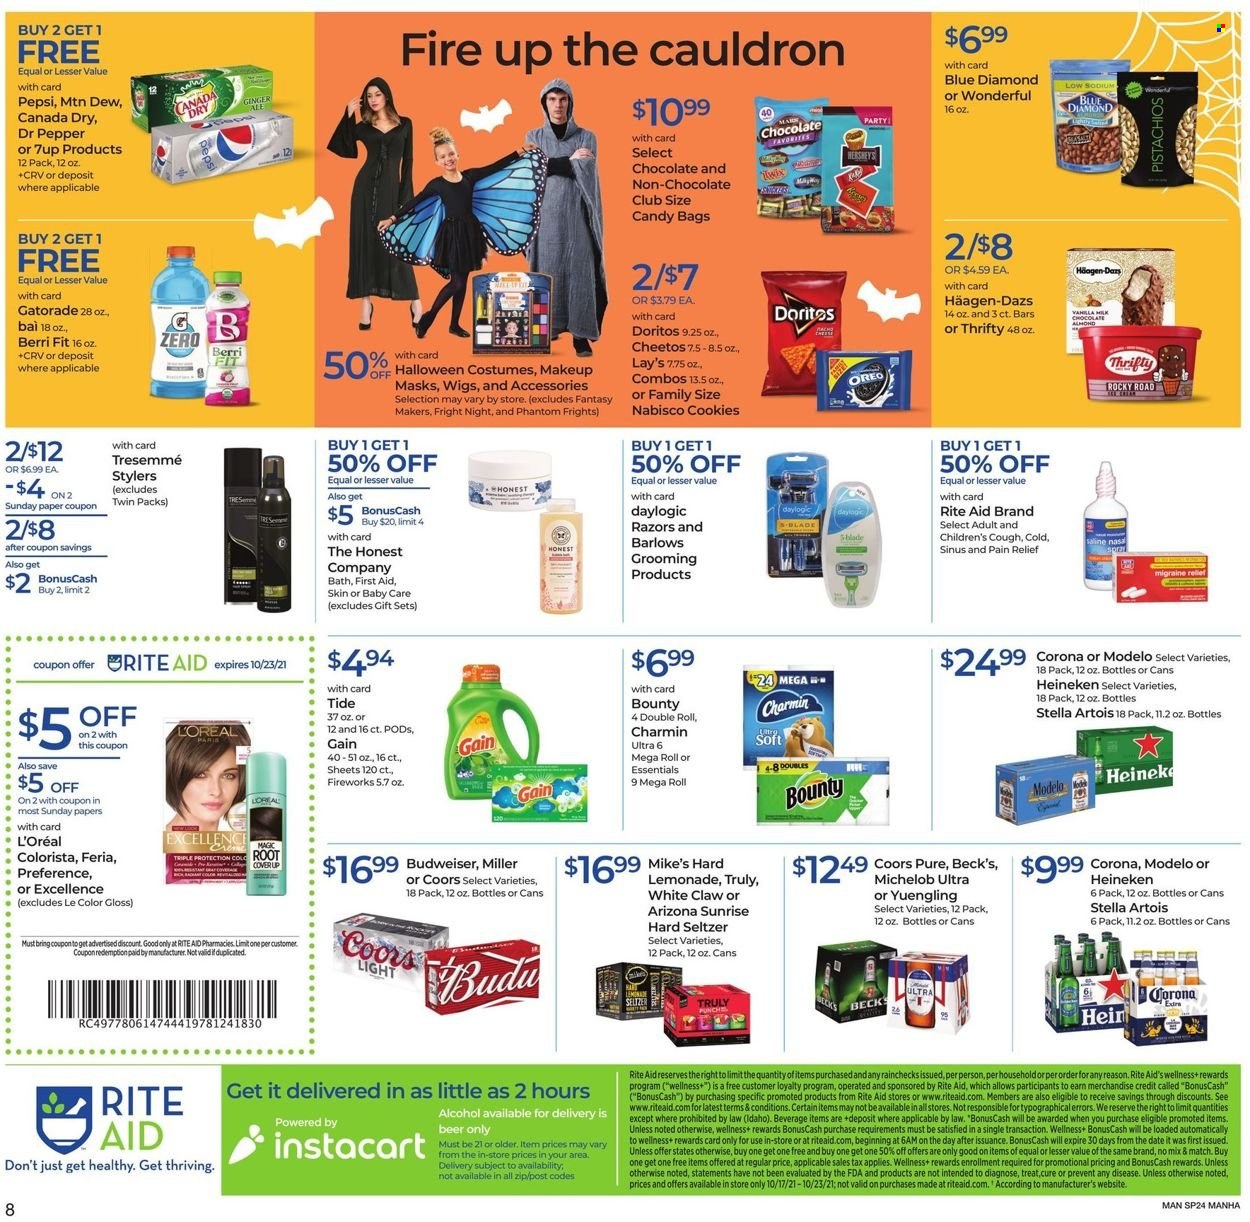 thumbnail - RITE AID Flyer - 10/17/2021 - 10/23/2021 - Sales products - Hershey's, Häagen-Dazs, Bounty, Doritos, Cheetos, Lay’s, ginger, pistachios, Blue Diamond, Canada Dry, lemonade, Mountain Dew, Pepsi, Dr. Pepper, 7UP, AriZona, Gatorade, alcohol, White Claw, Hard Seltzer, TRULY, beer, Corona Extra, Heineken, Miller, Beck's, Modelo, Charmin, Gain, Tide, L’Oréal, Daylogic, TRESemmé, makeup, Halloween, costume, pain relief, Budweiser, Stella Artois, Coors, Yuengling, Michelob. Page 4.